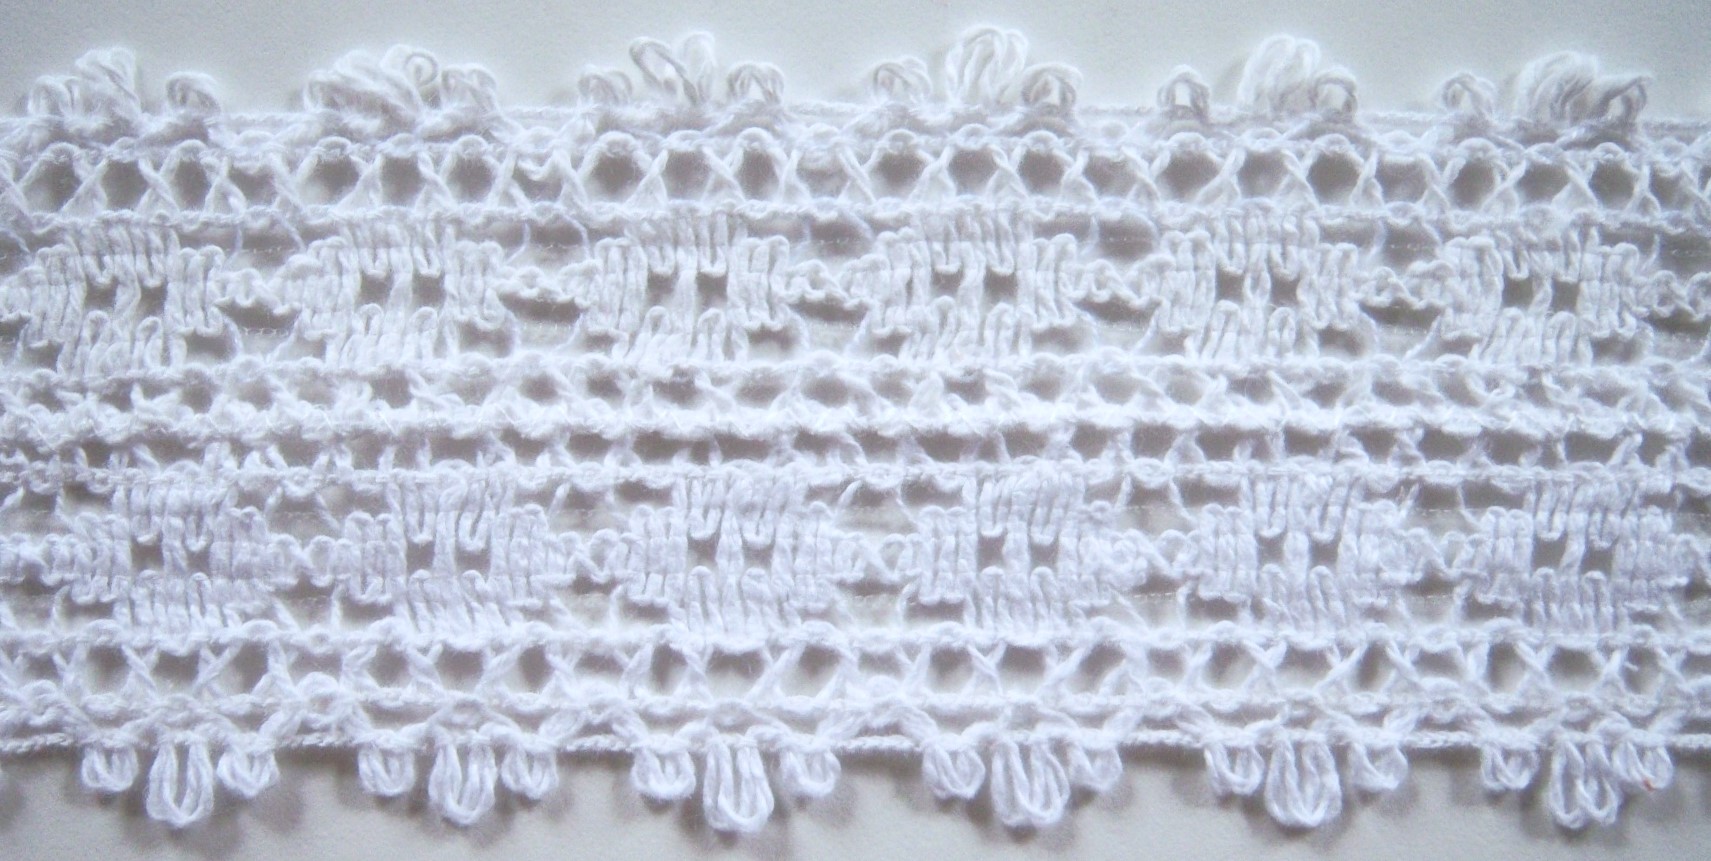 White 2 1/4" Cluny Lace